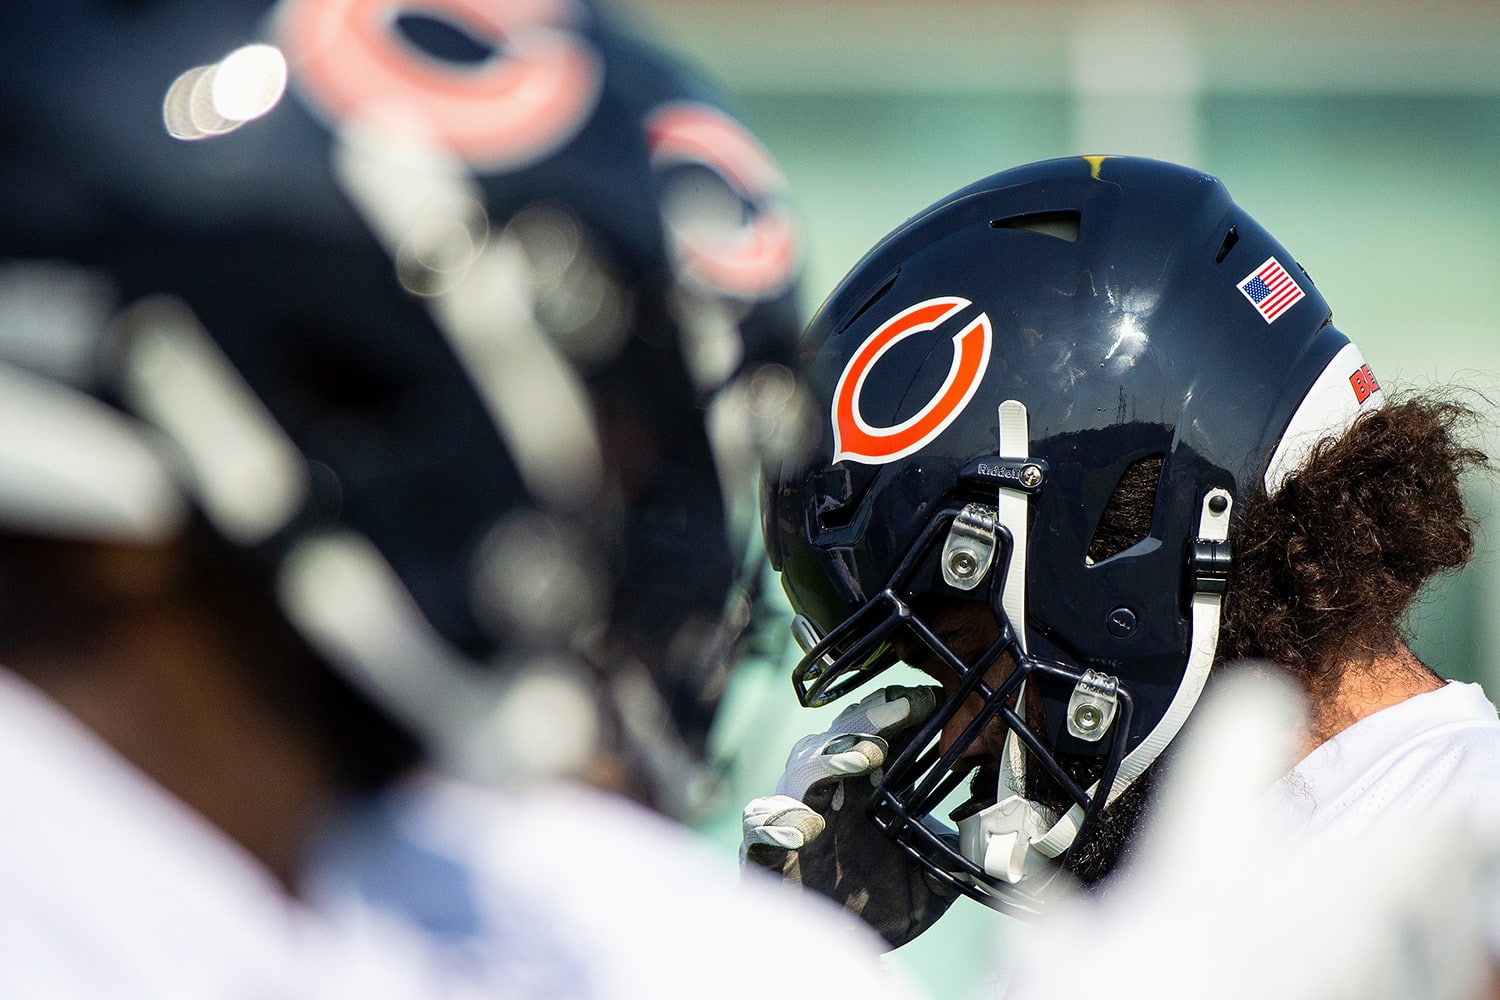 chicago bears face value ticket prices